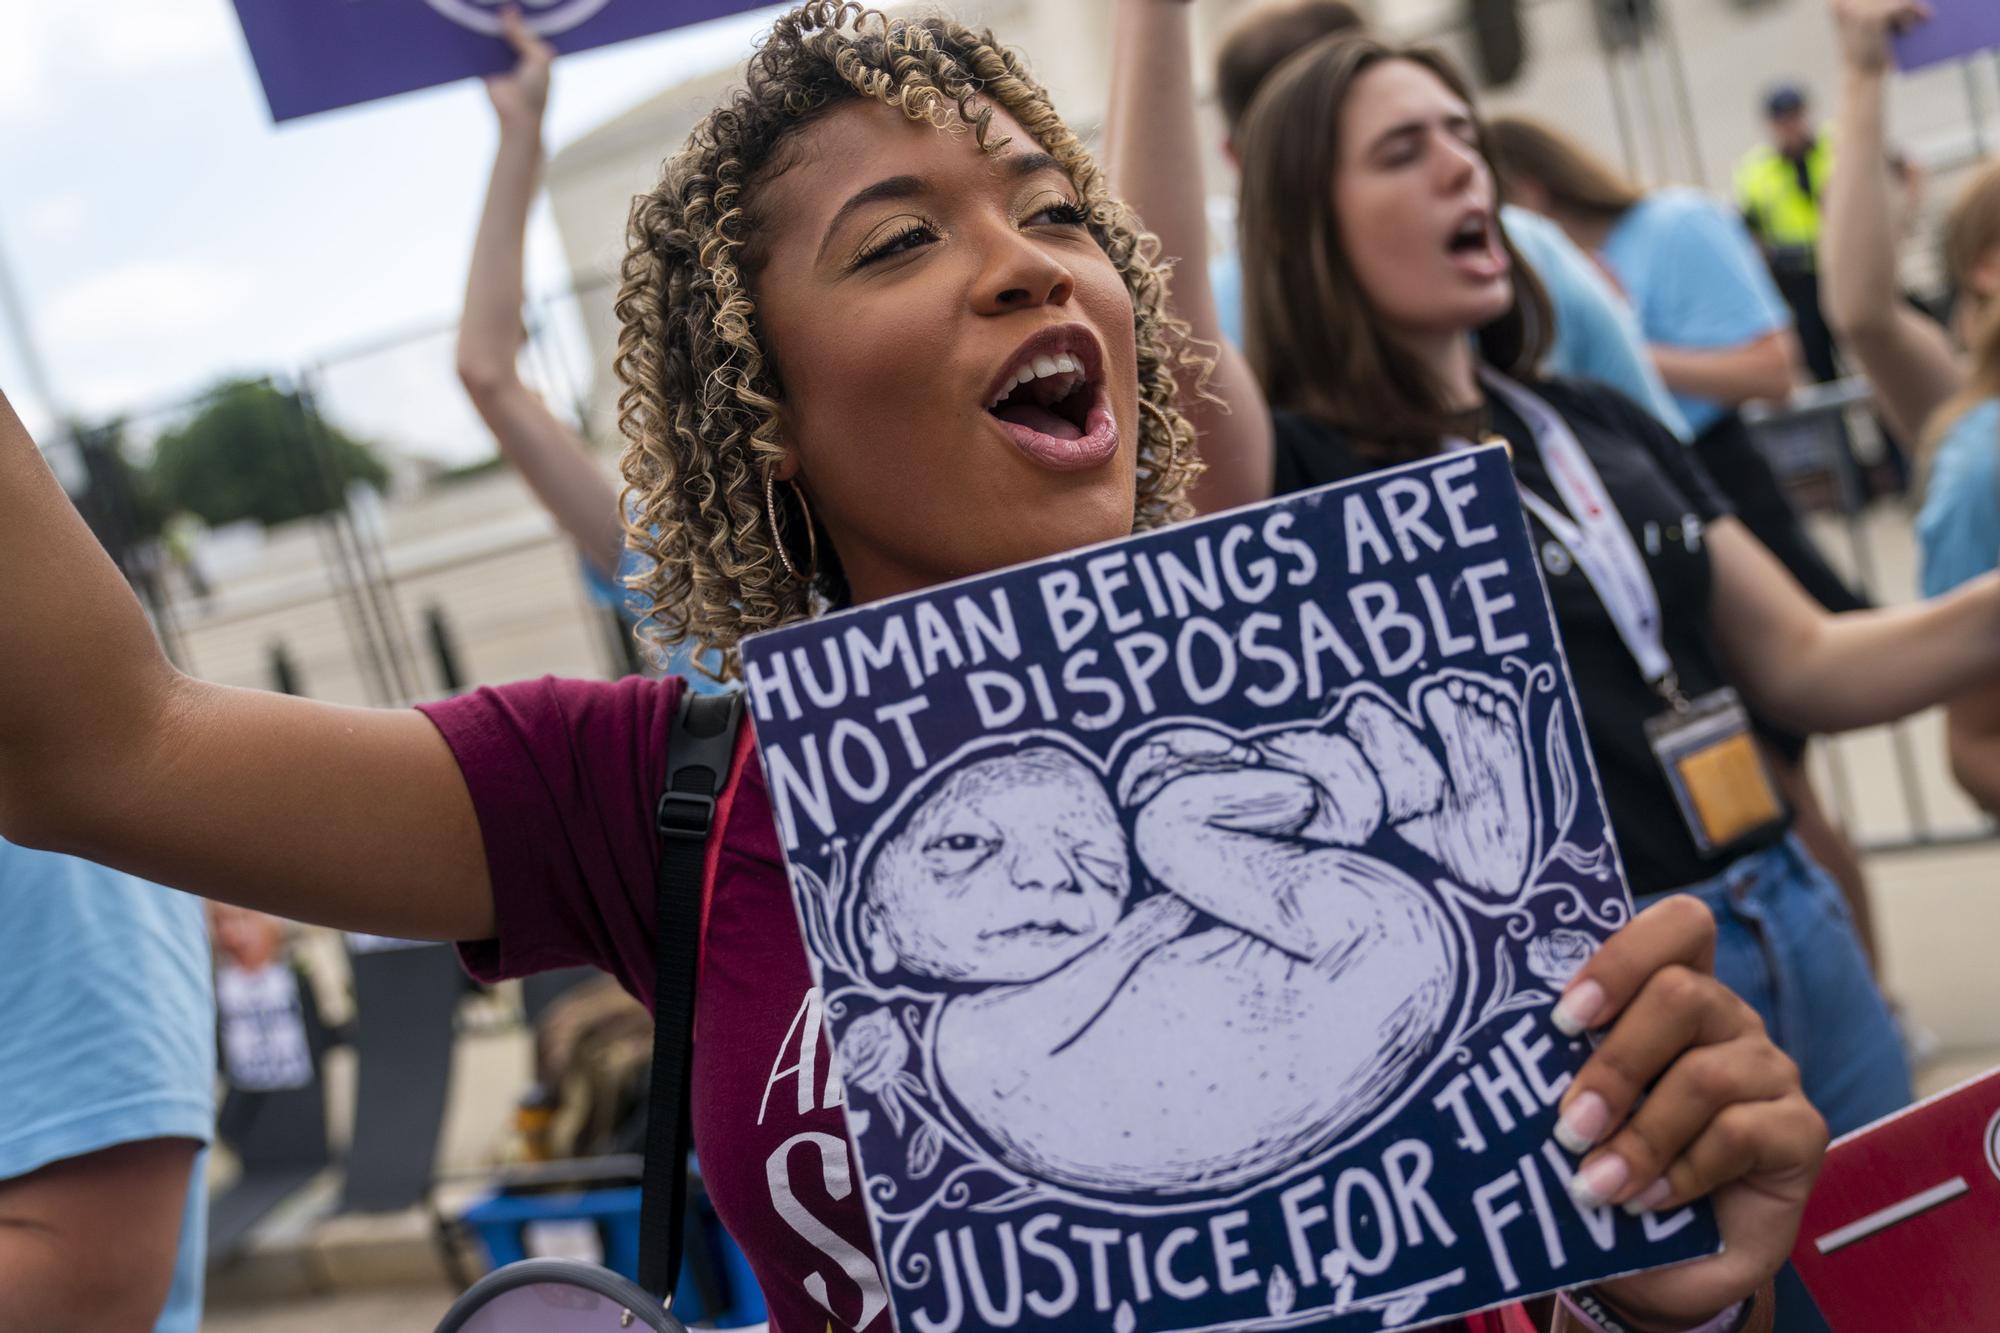 Abortion rights activists and anti-abortion activists rally at the Supreme Court